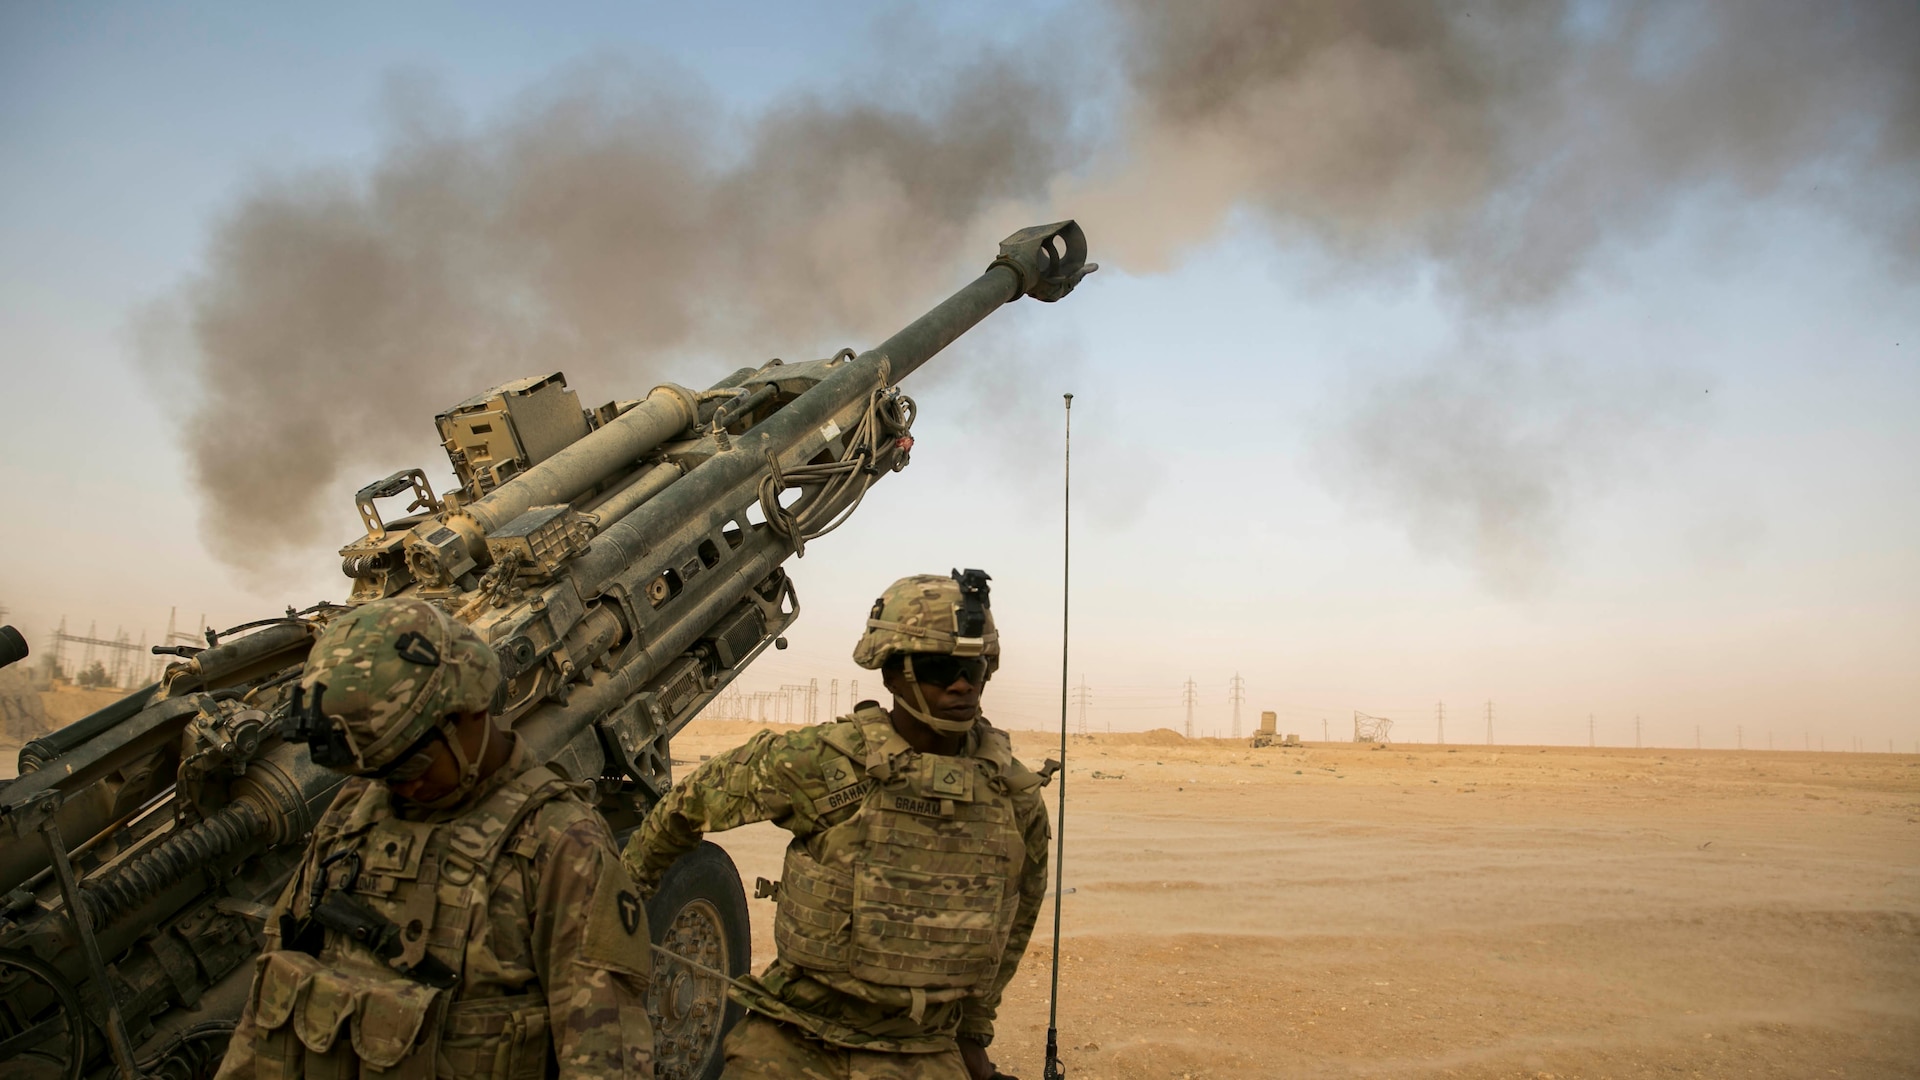 American artillery soldiers respond to a fire mission somewhere in Iraq in support of Combined Joint Task Force Operation Inherent Resolve to provide assistance to their Iraqi partners.